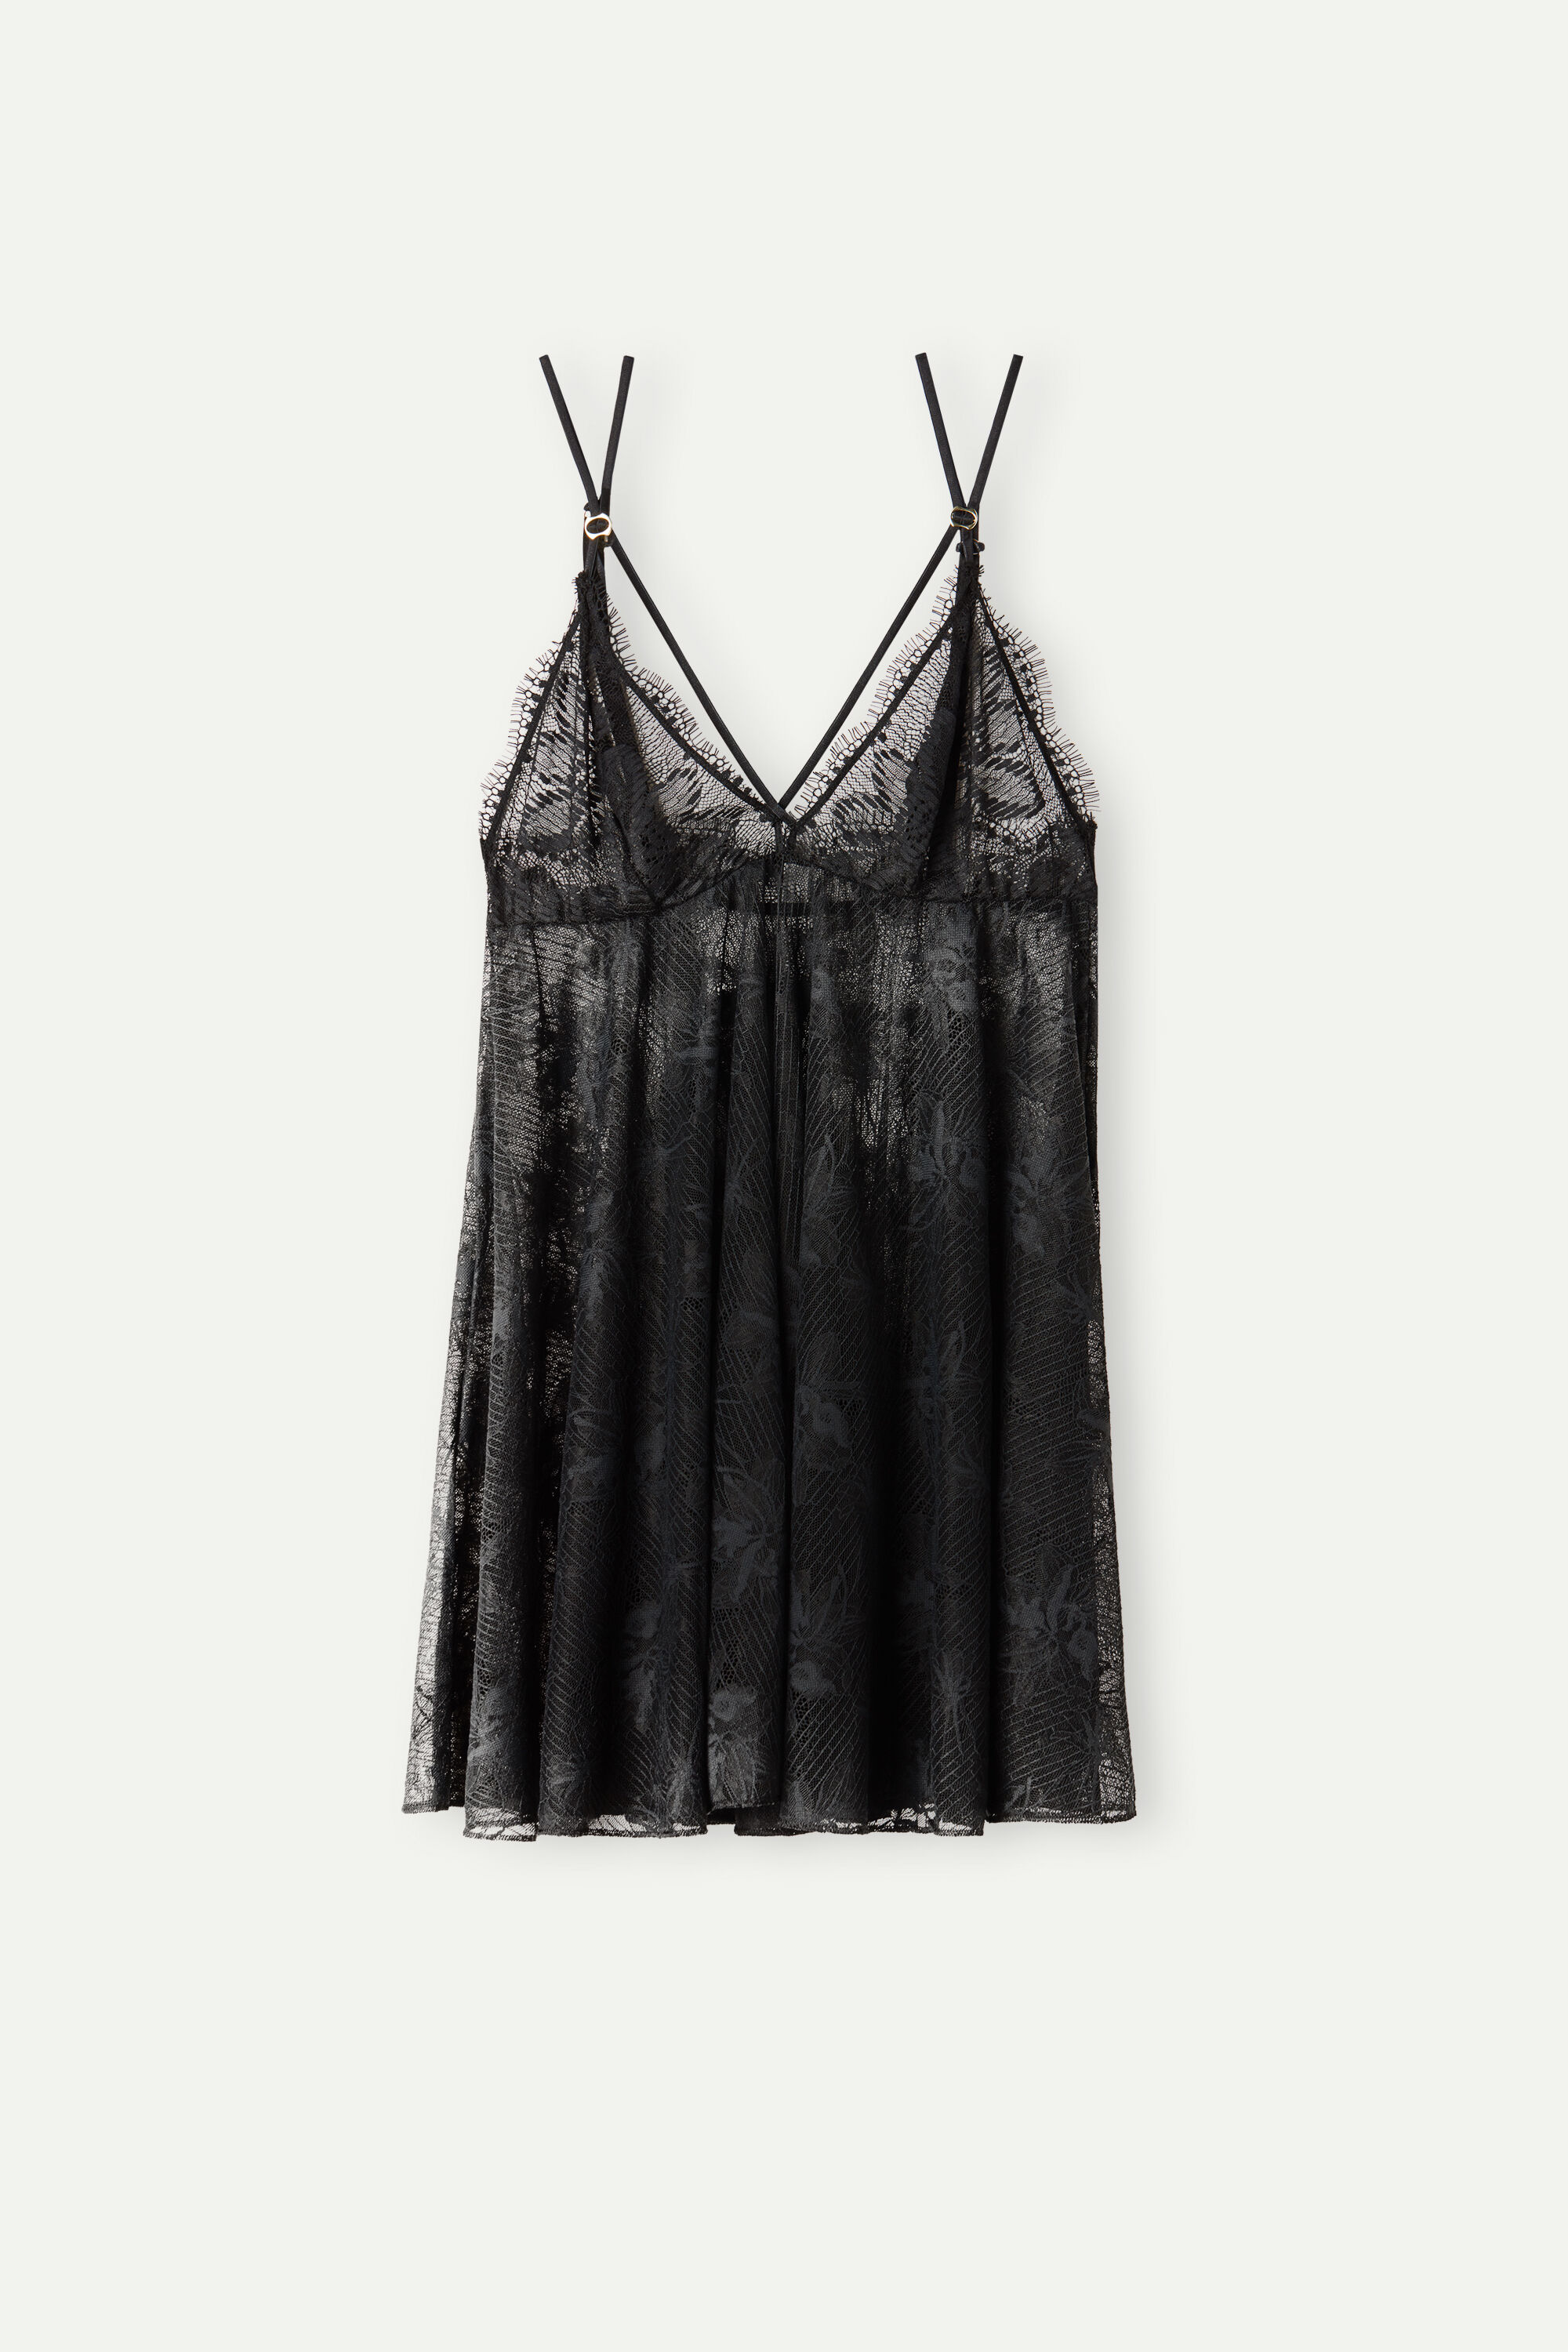 Sensual Unbounded Lace Babydoll | Intimissimi